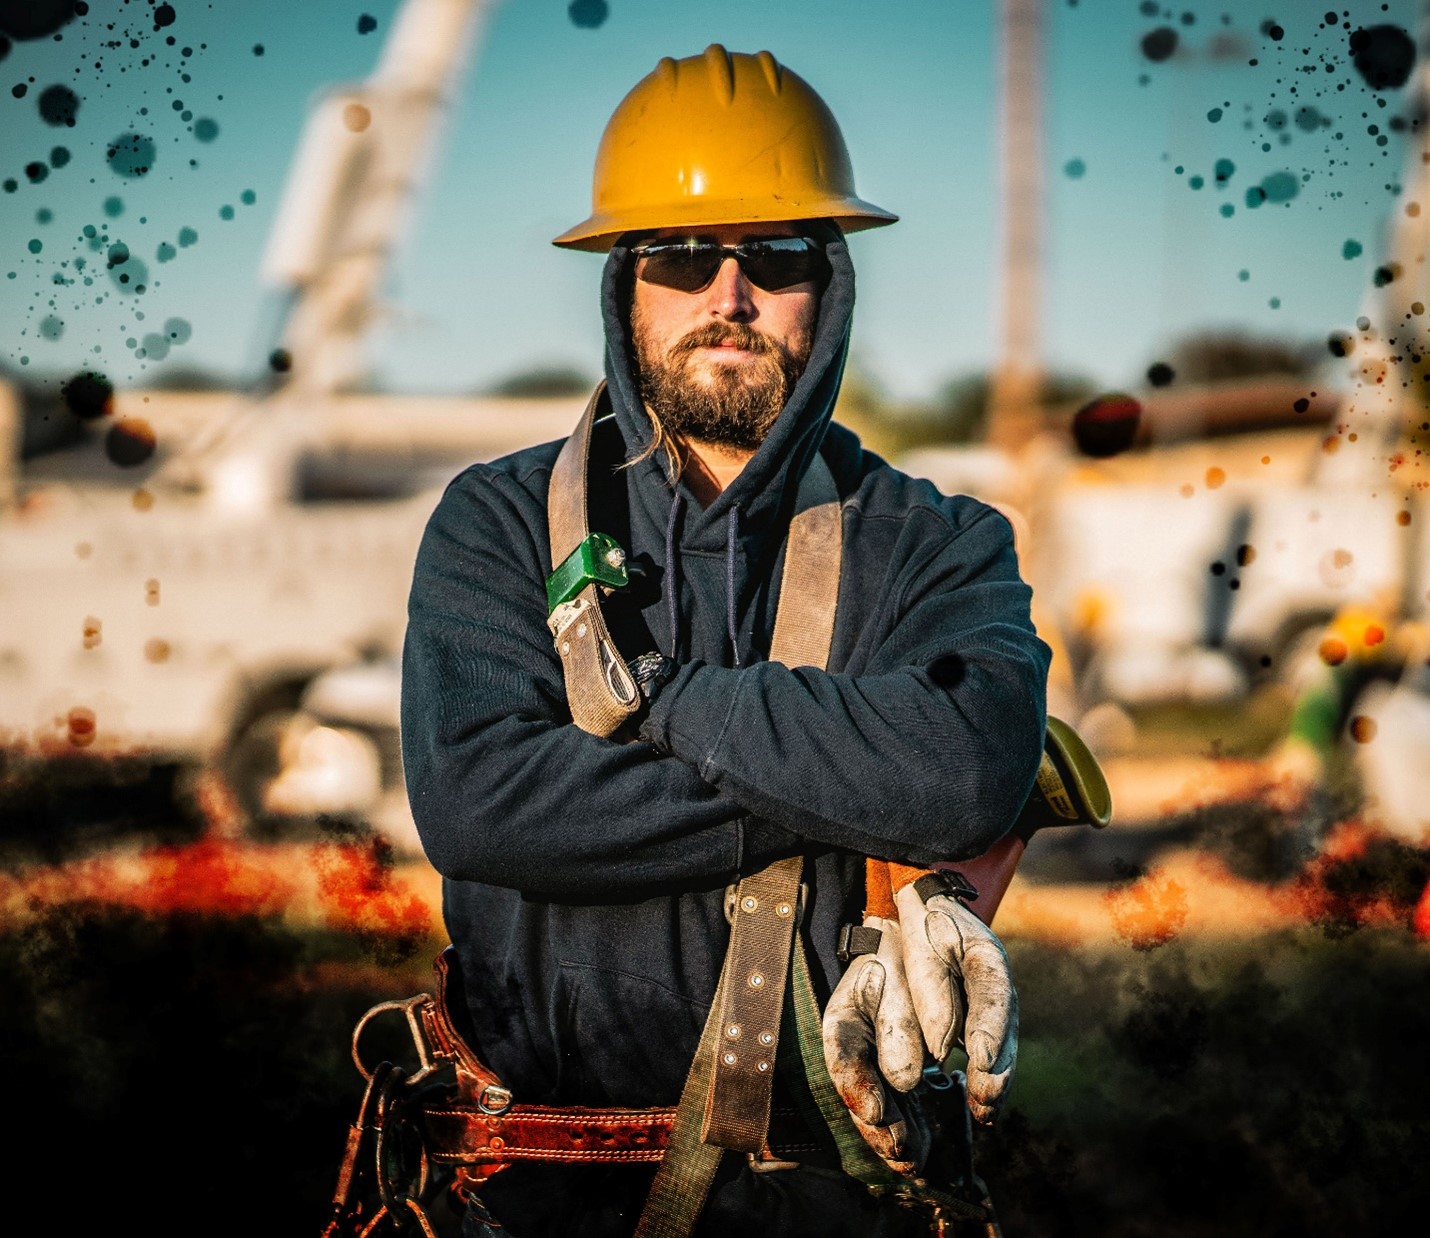 Image of lineworker posed with sunglasses and arms crosed